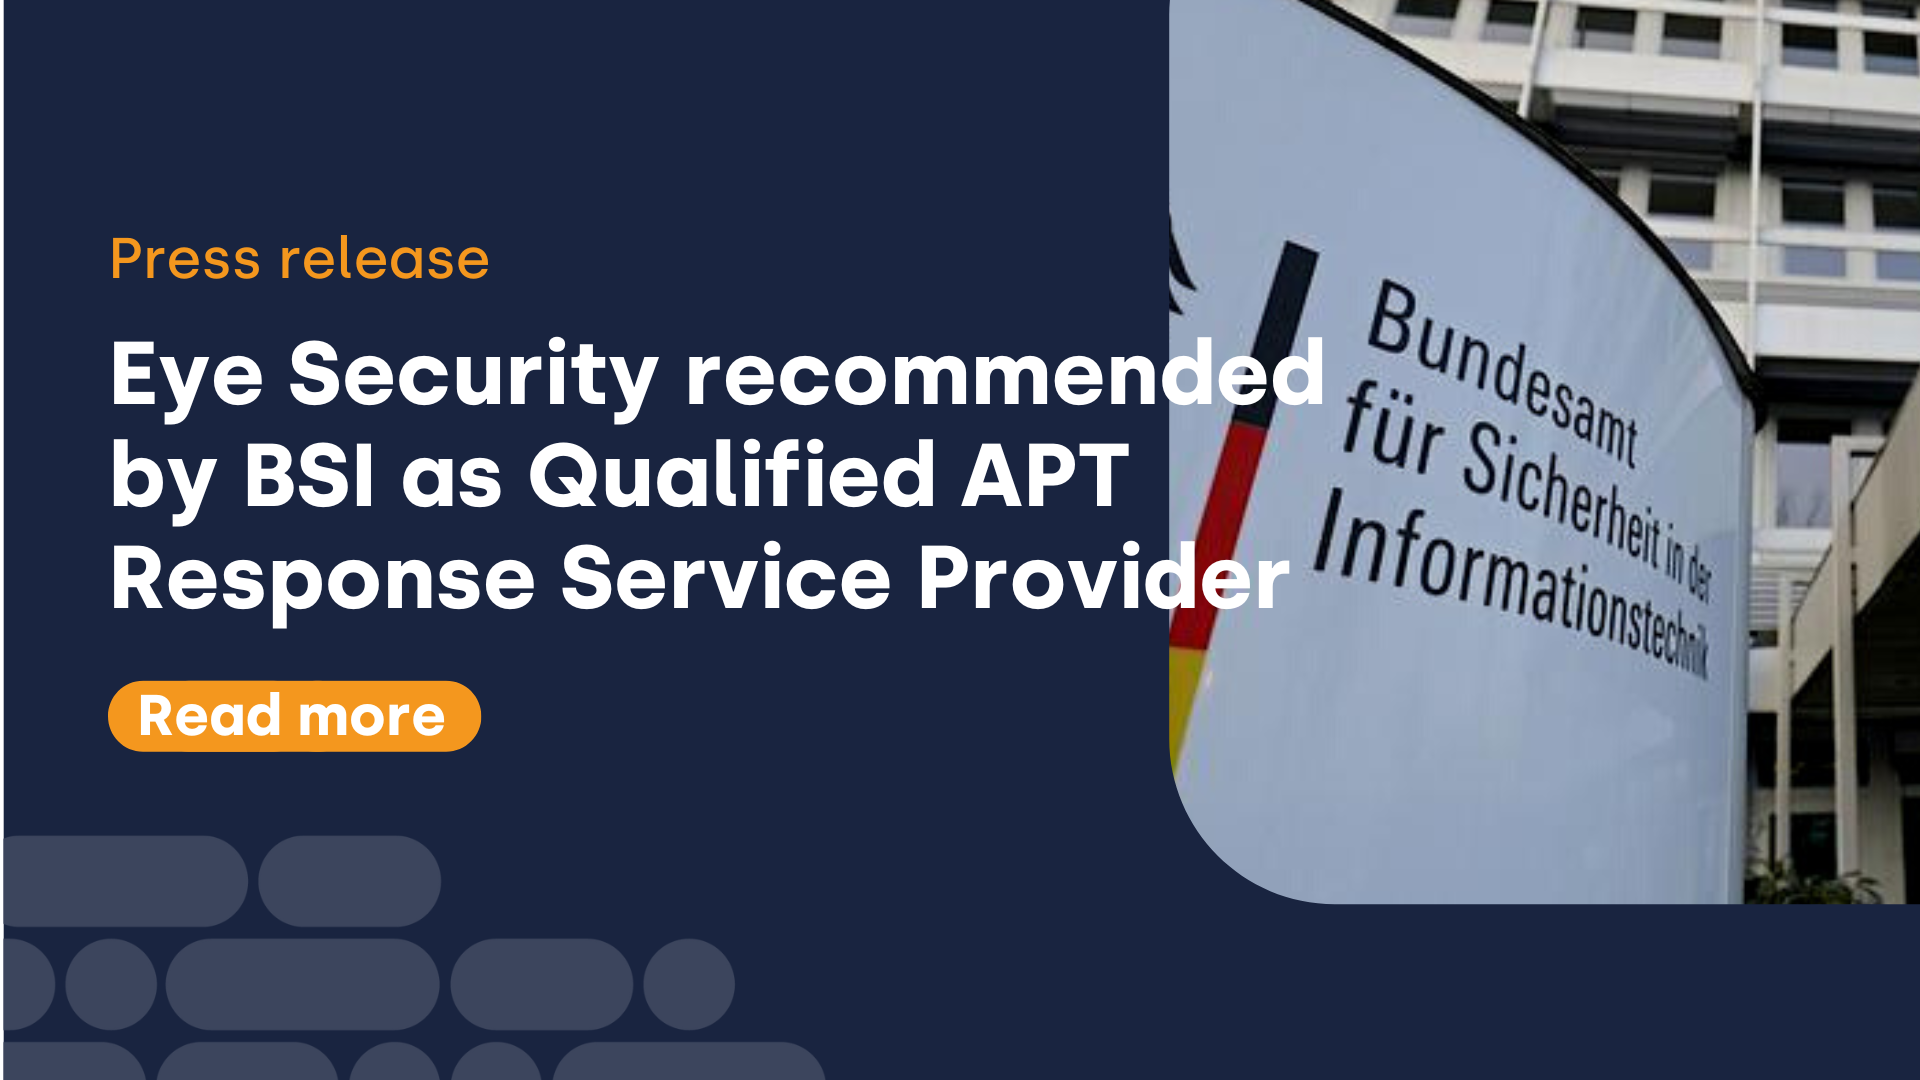 Eye Security recommended by German Federal Cyber Security Authority as Qualified APT Response Service Provider